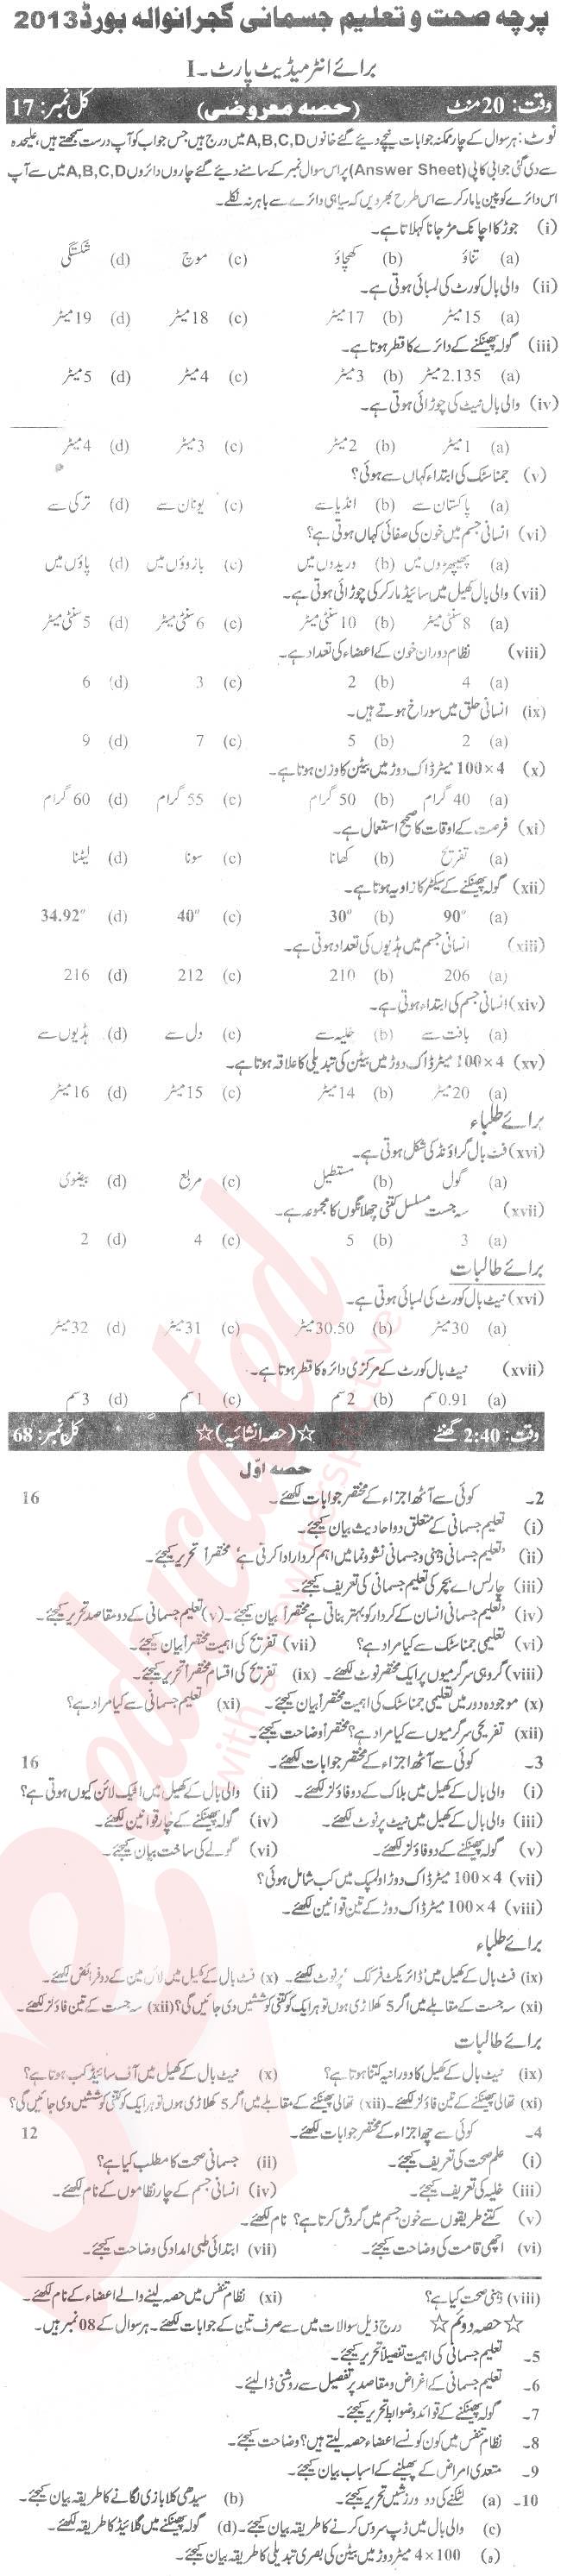 Health and Physical Education FA Part 1 Past Paper Group 1 BISE Gujranwala 2013